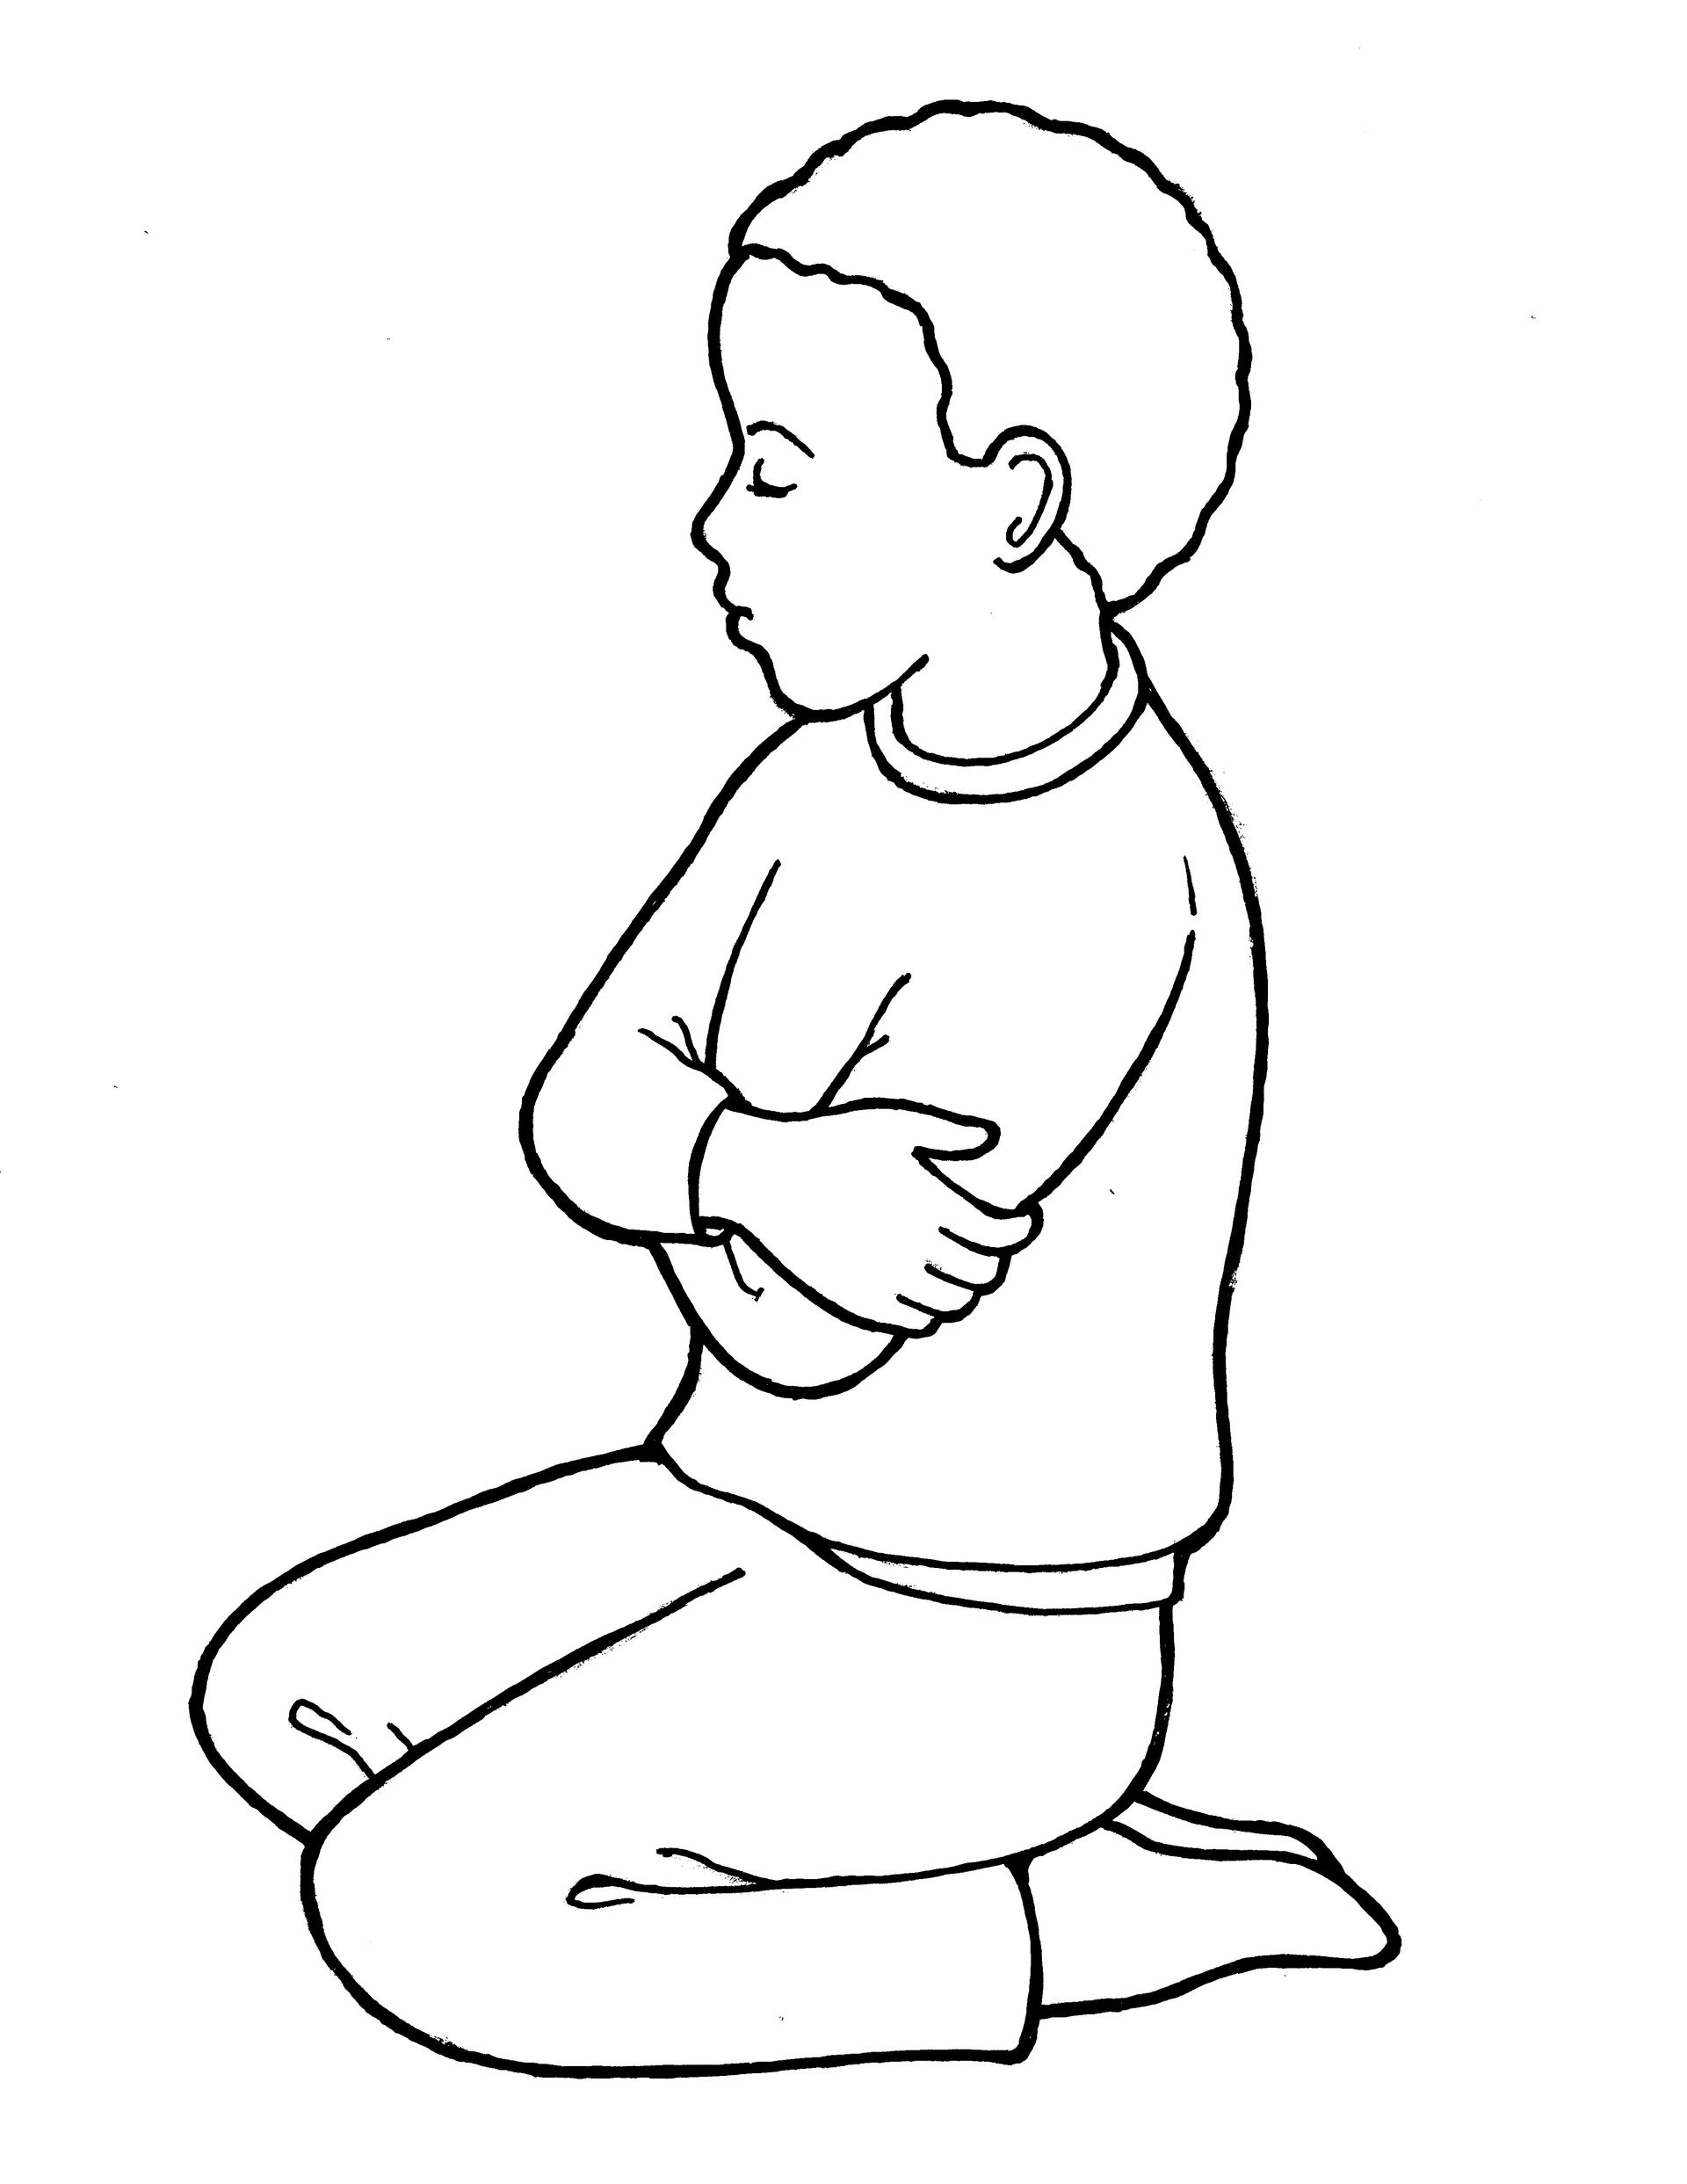 An illustration of a young boy kneeling in prayer, from the nursery manual Behold Your Little Ones (2008), page 19.